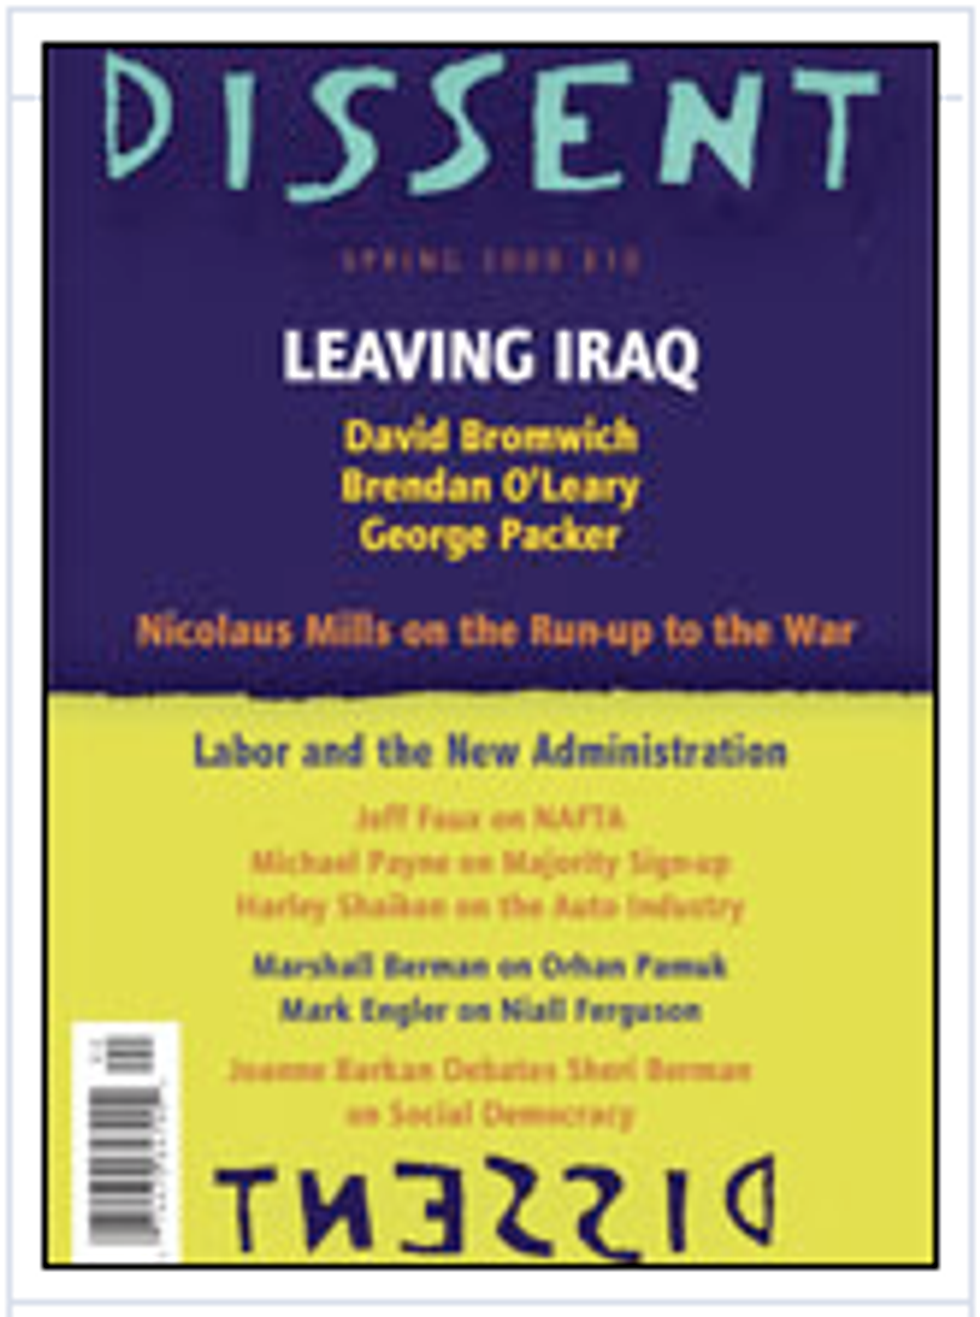 Dissent Hasn't Forgotten About Iraq Like Some Of Us (Looking At You, Everyone In America)